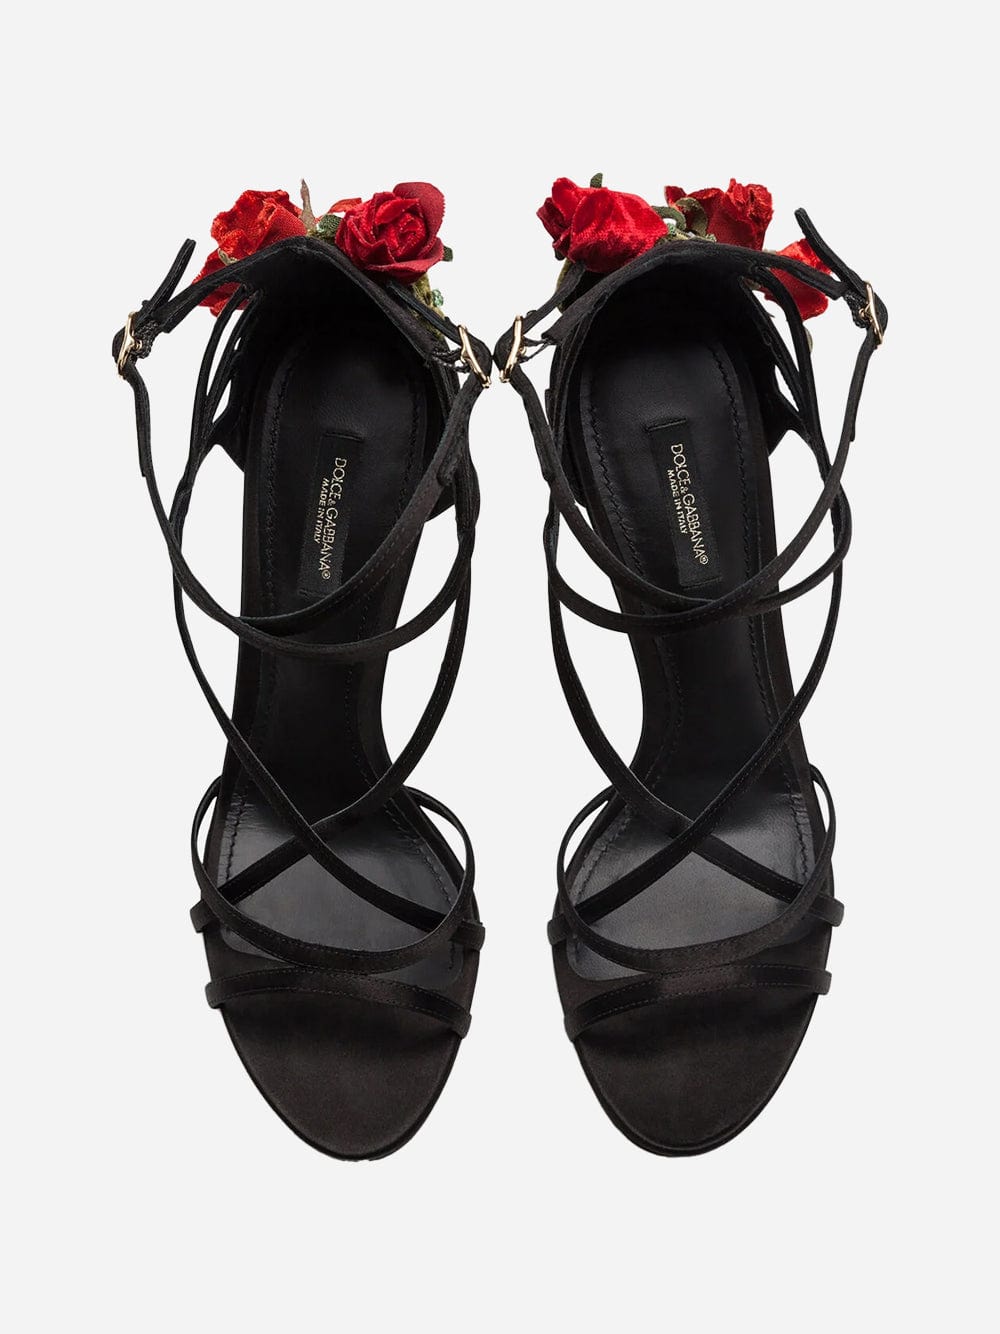 Dolce & Gabbana Rose Embroidery Sandals